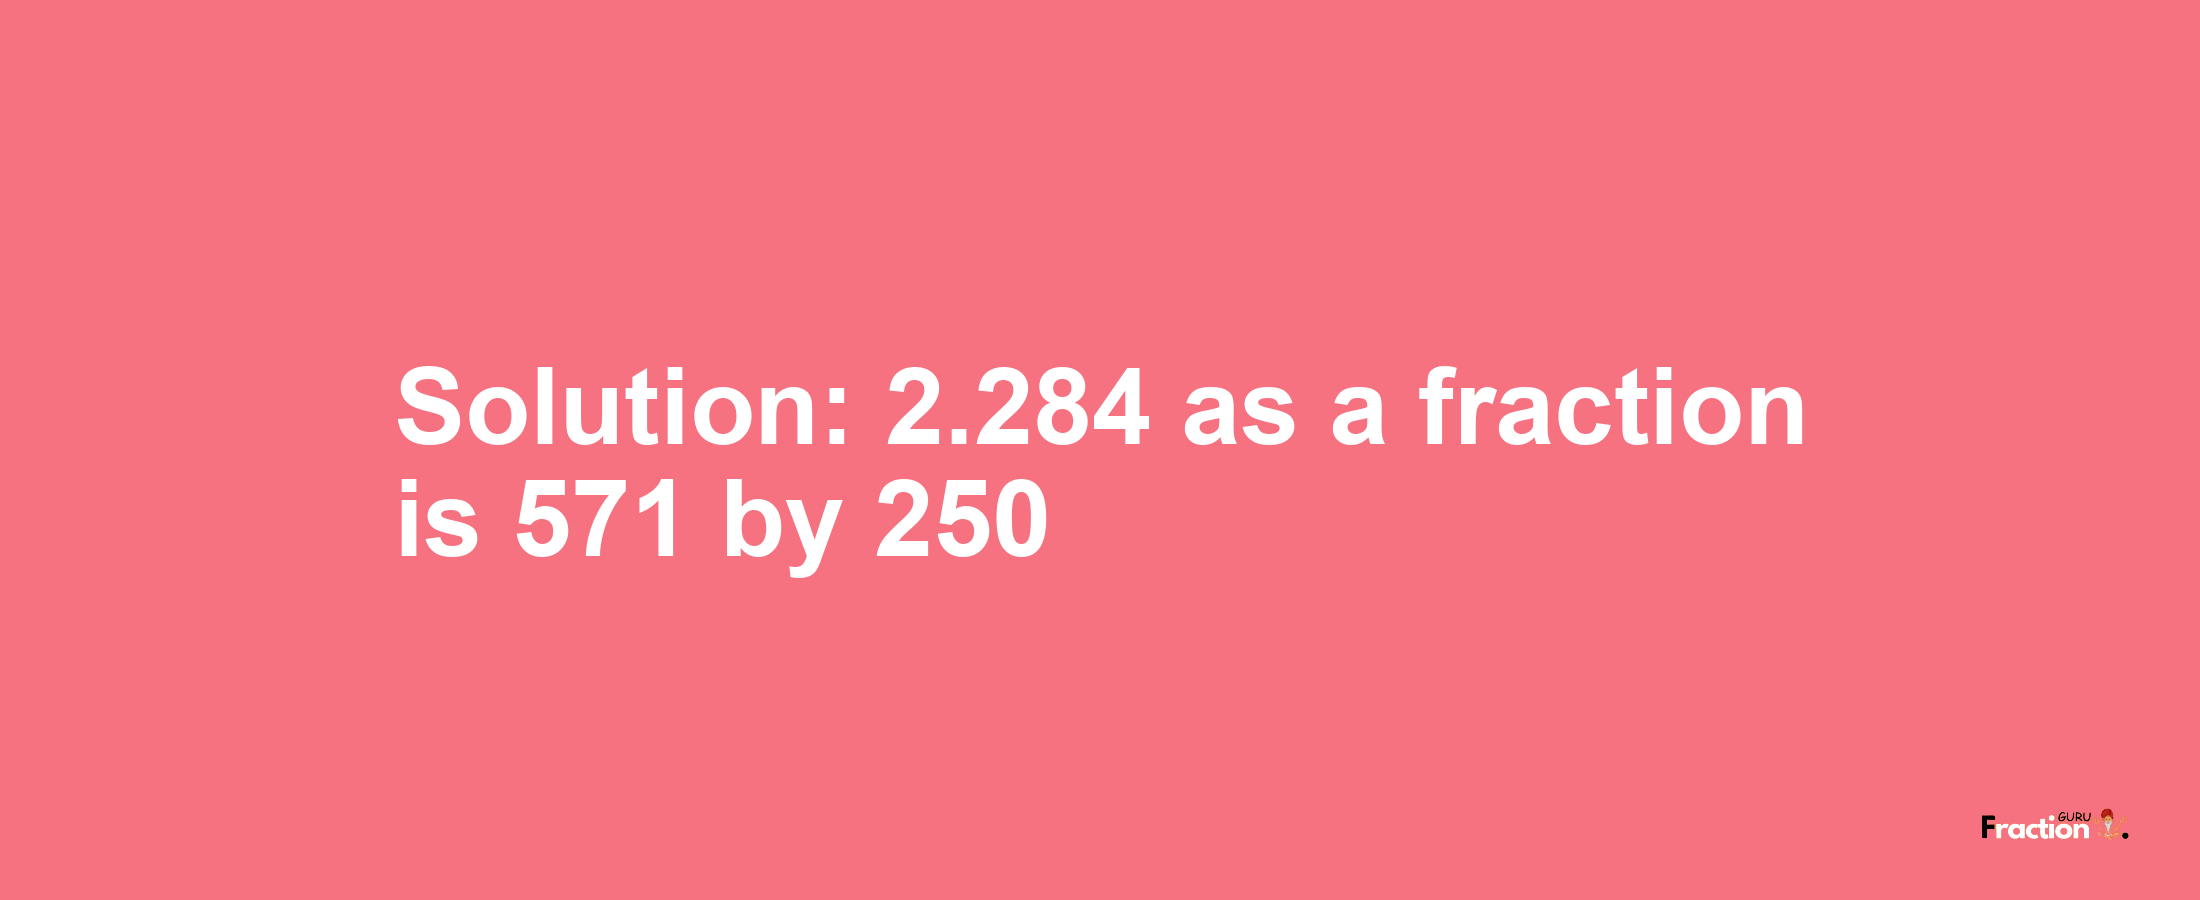 Solution:2.284 as a fraction is 571/250